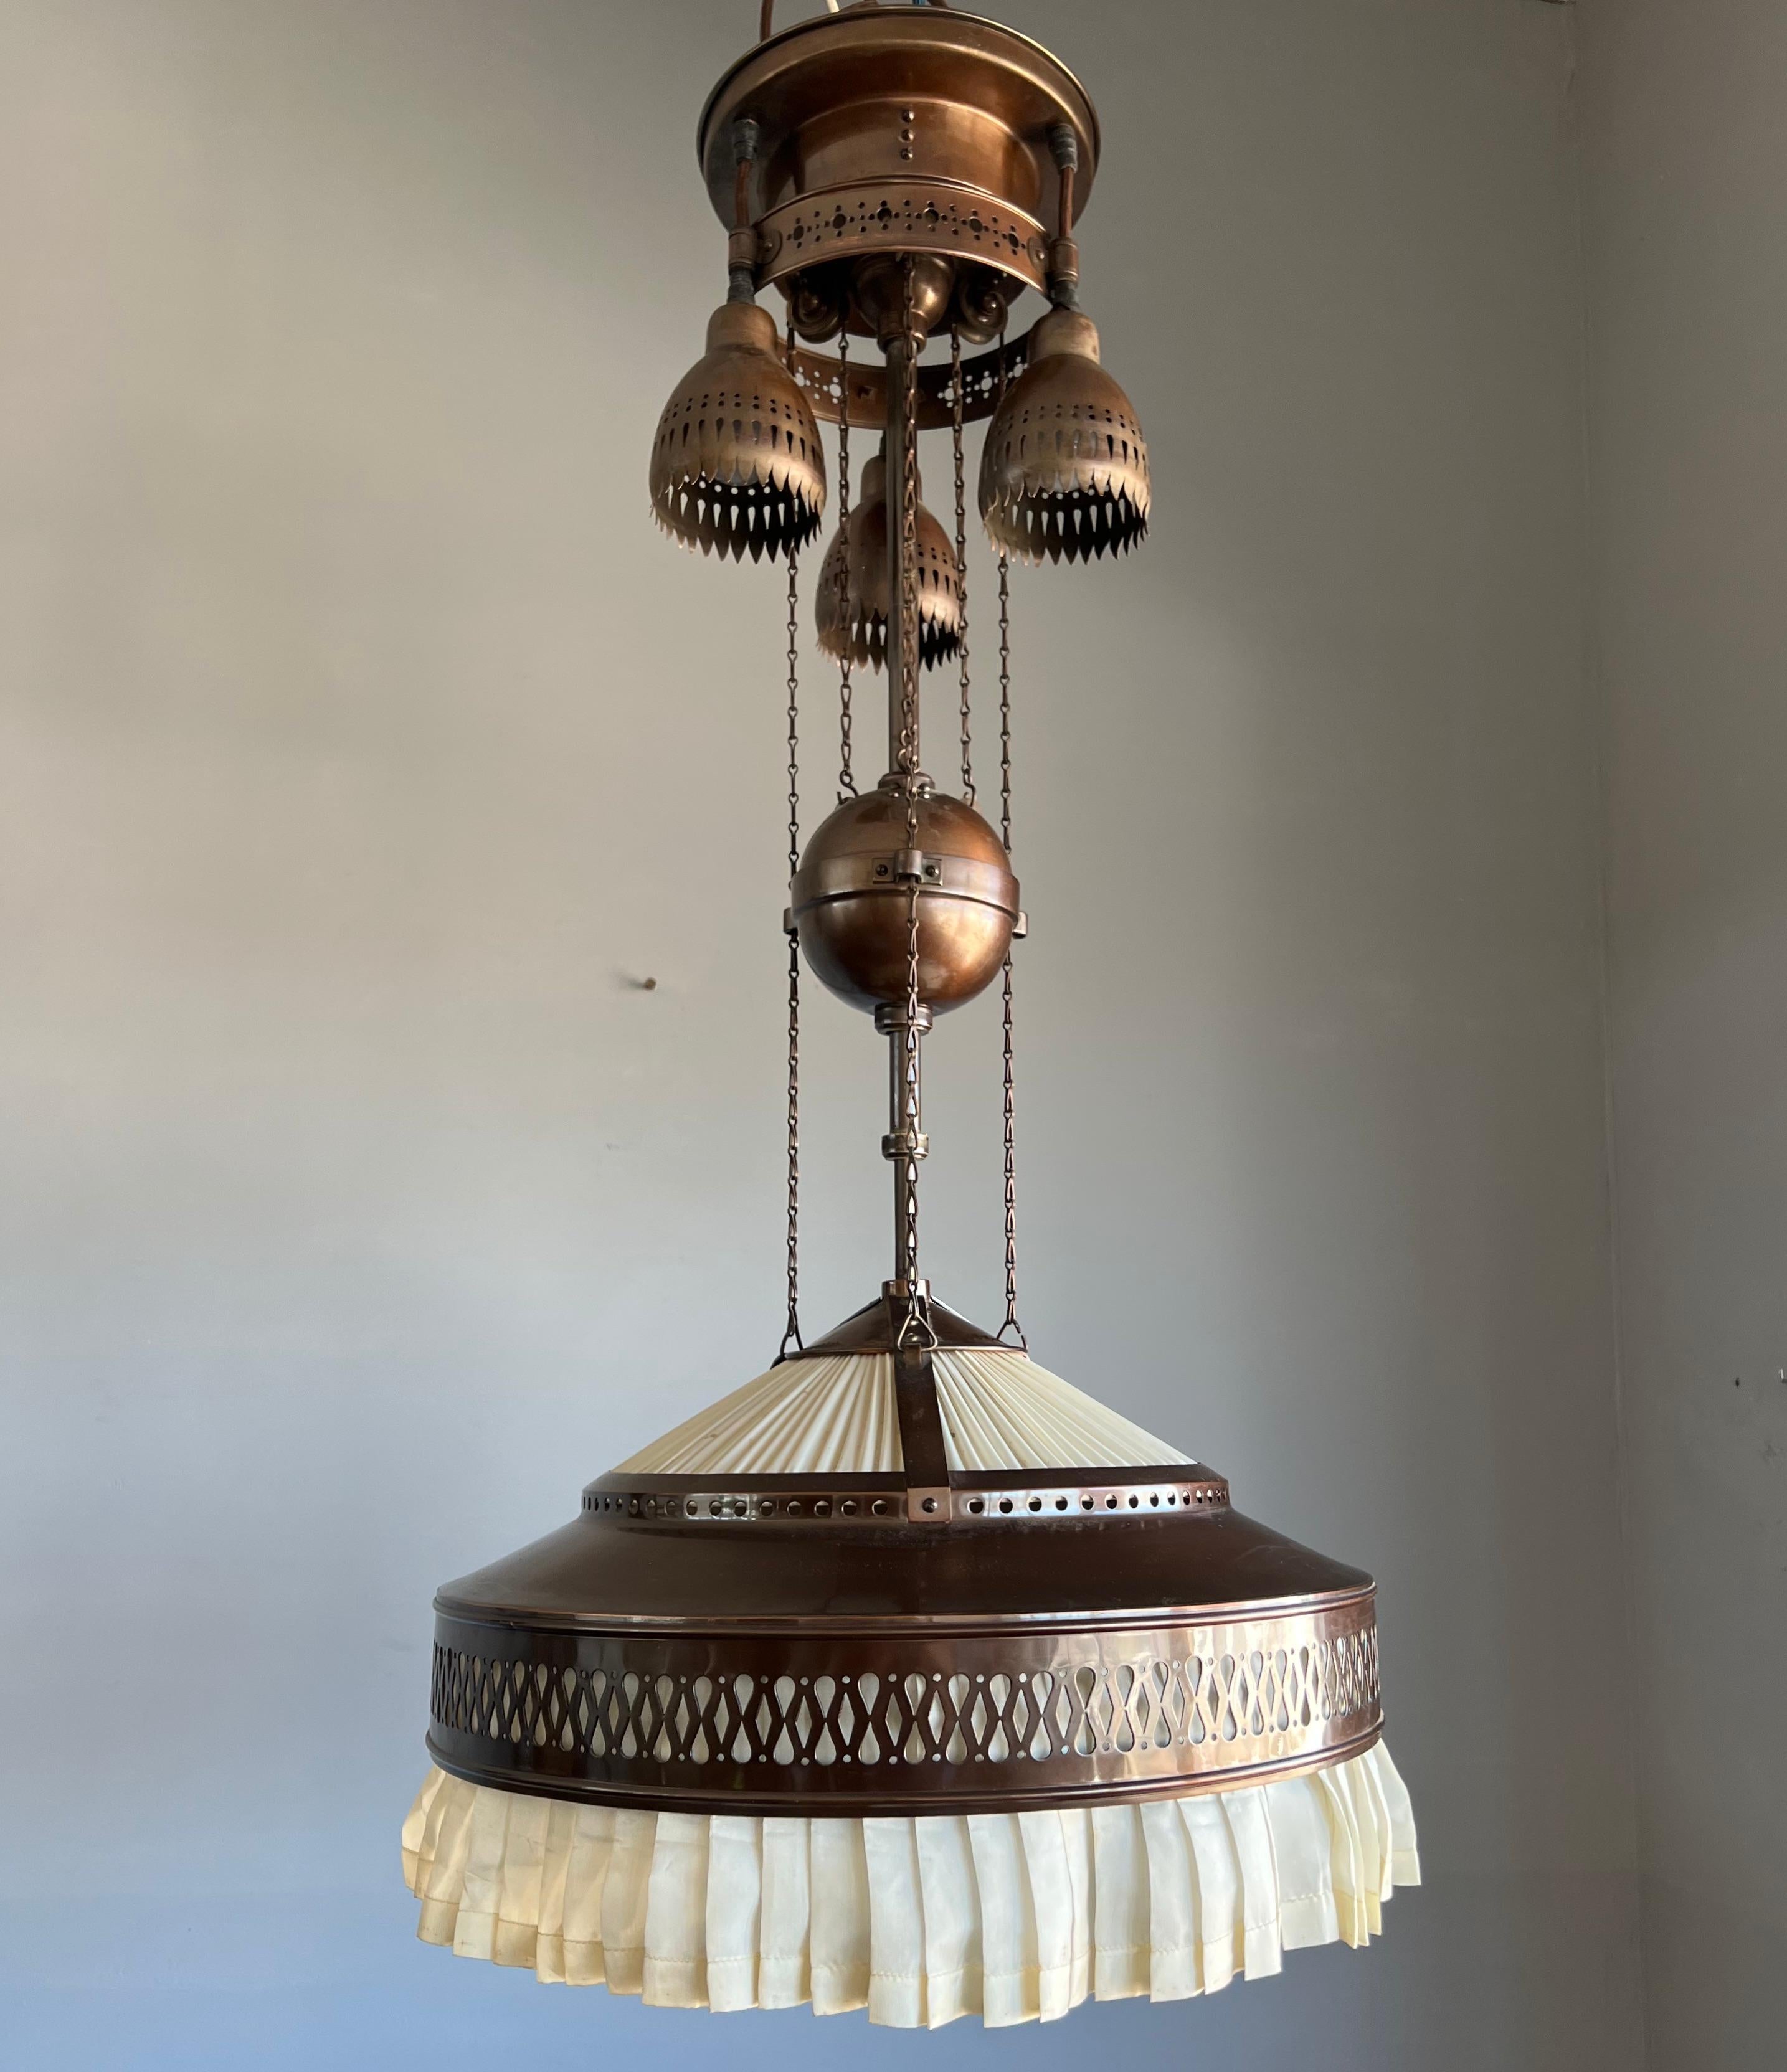 Large and striking Dutch Arts & Crafts 6-light chandelier.

If you live or work in an Arts & Crafts (inspired) building and you are looking for the perfect fixture to grace your living or work space then this very rare and all handcrafted, copper